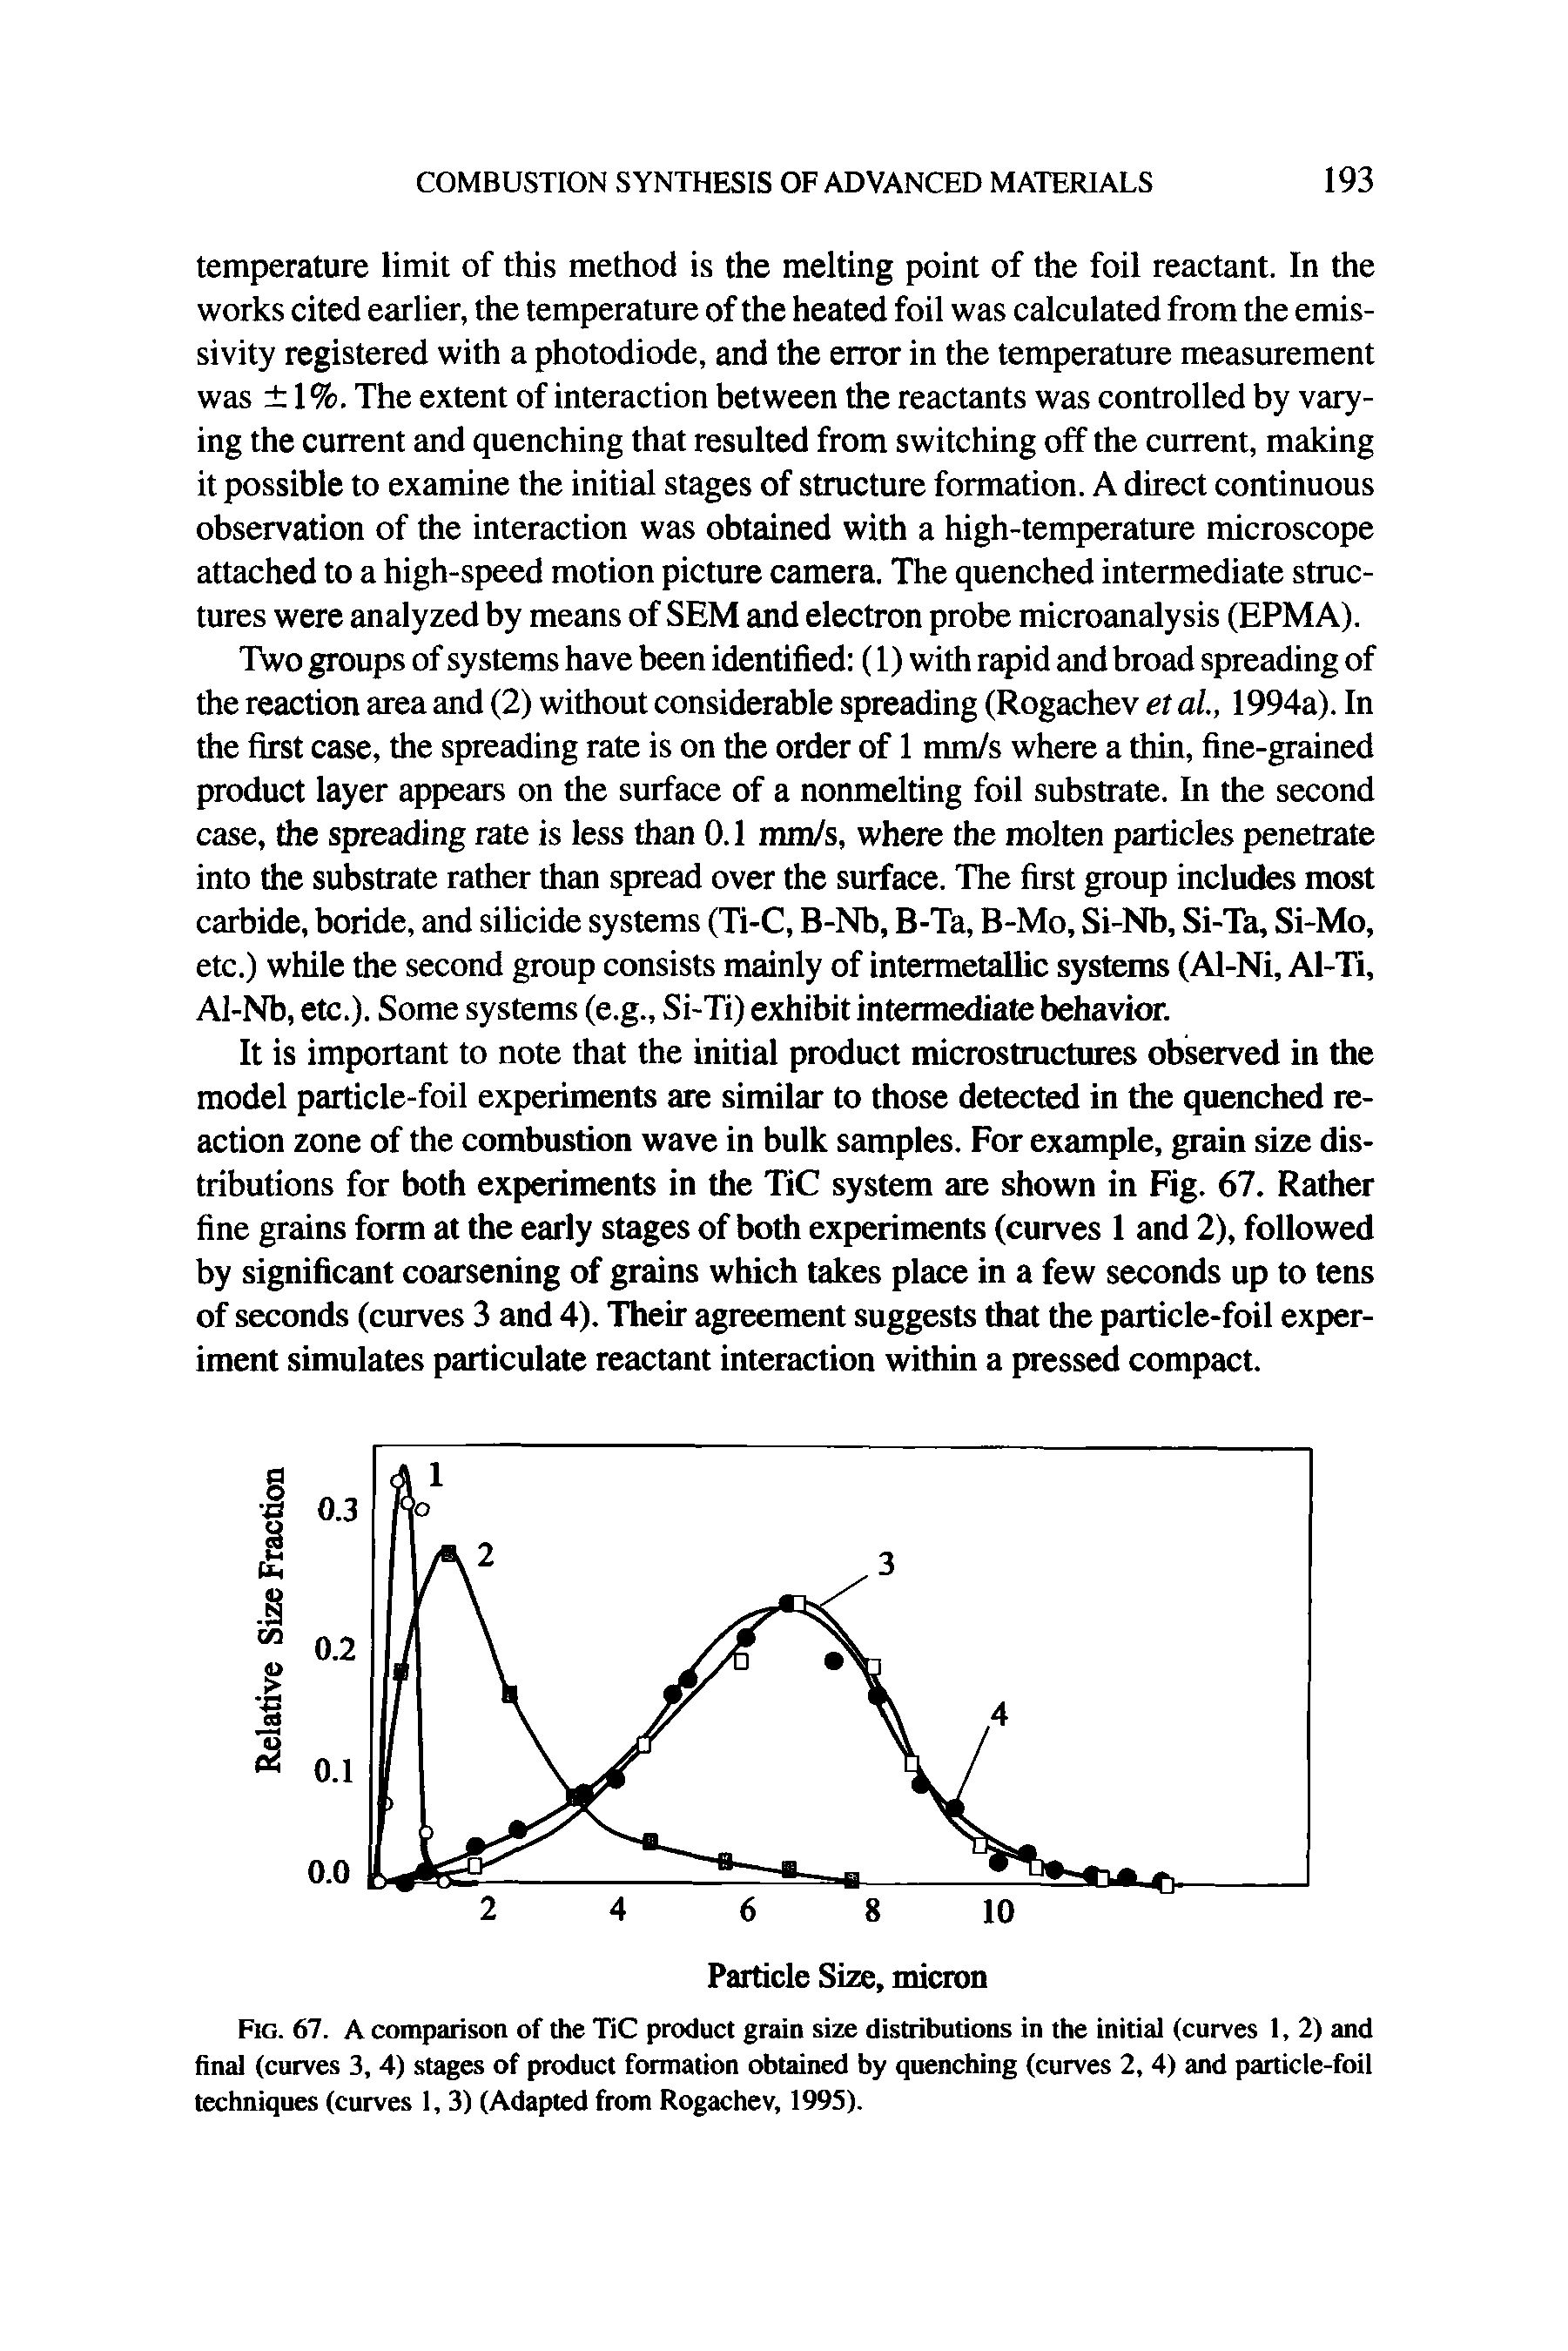 Fig. 67. A comparison of the TiC product grain size distributions in the initial (curves 1, 2) and final (curves 3, 4) stages of product formation obtained by quenching (curves 2, 4) and particle-foil techniques (curves 1, 3) (Adapted from Rogachev, 1995).